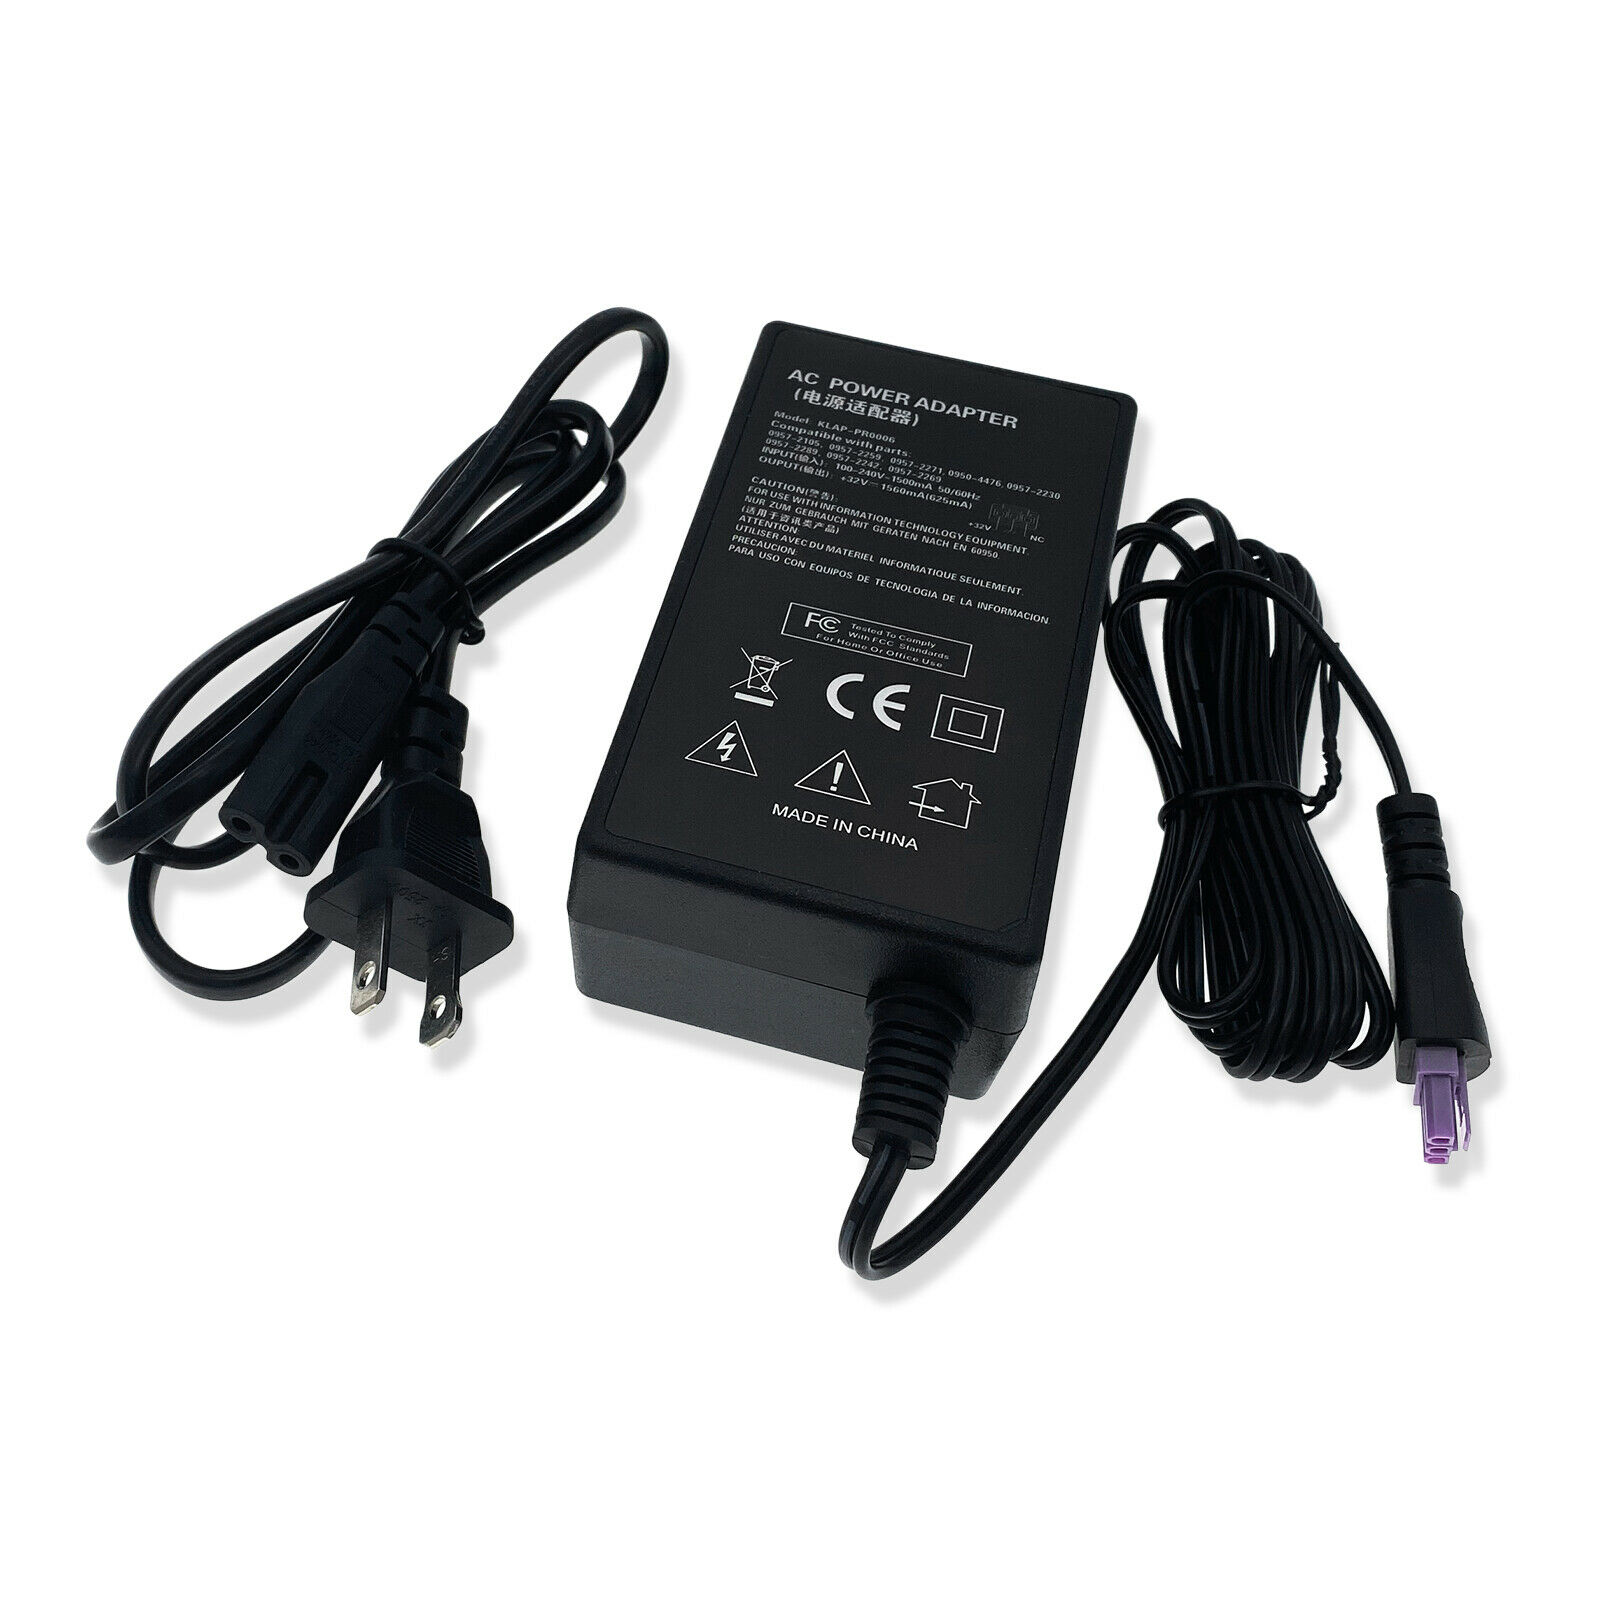 New AC Adapter Power Cord Charger For HP Deskjet 3056A 3510 3511 3512 Printer Brand: Unbranded C